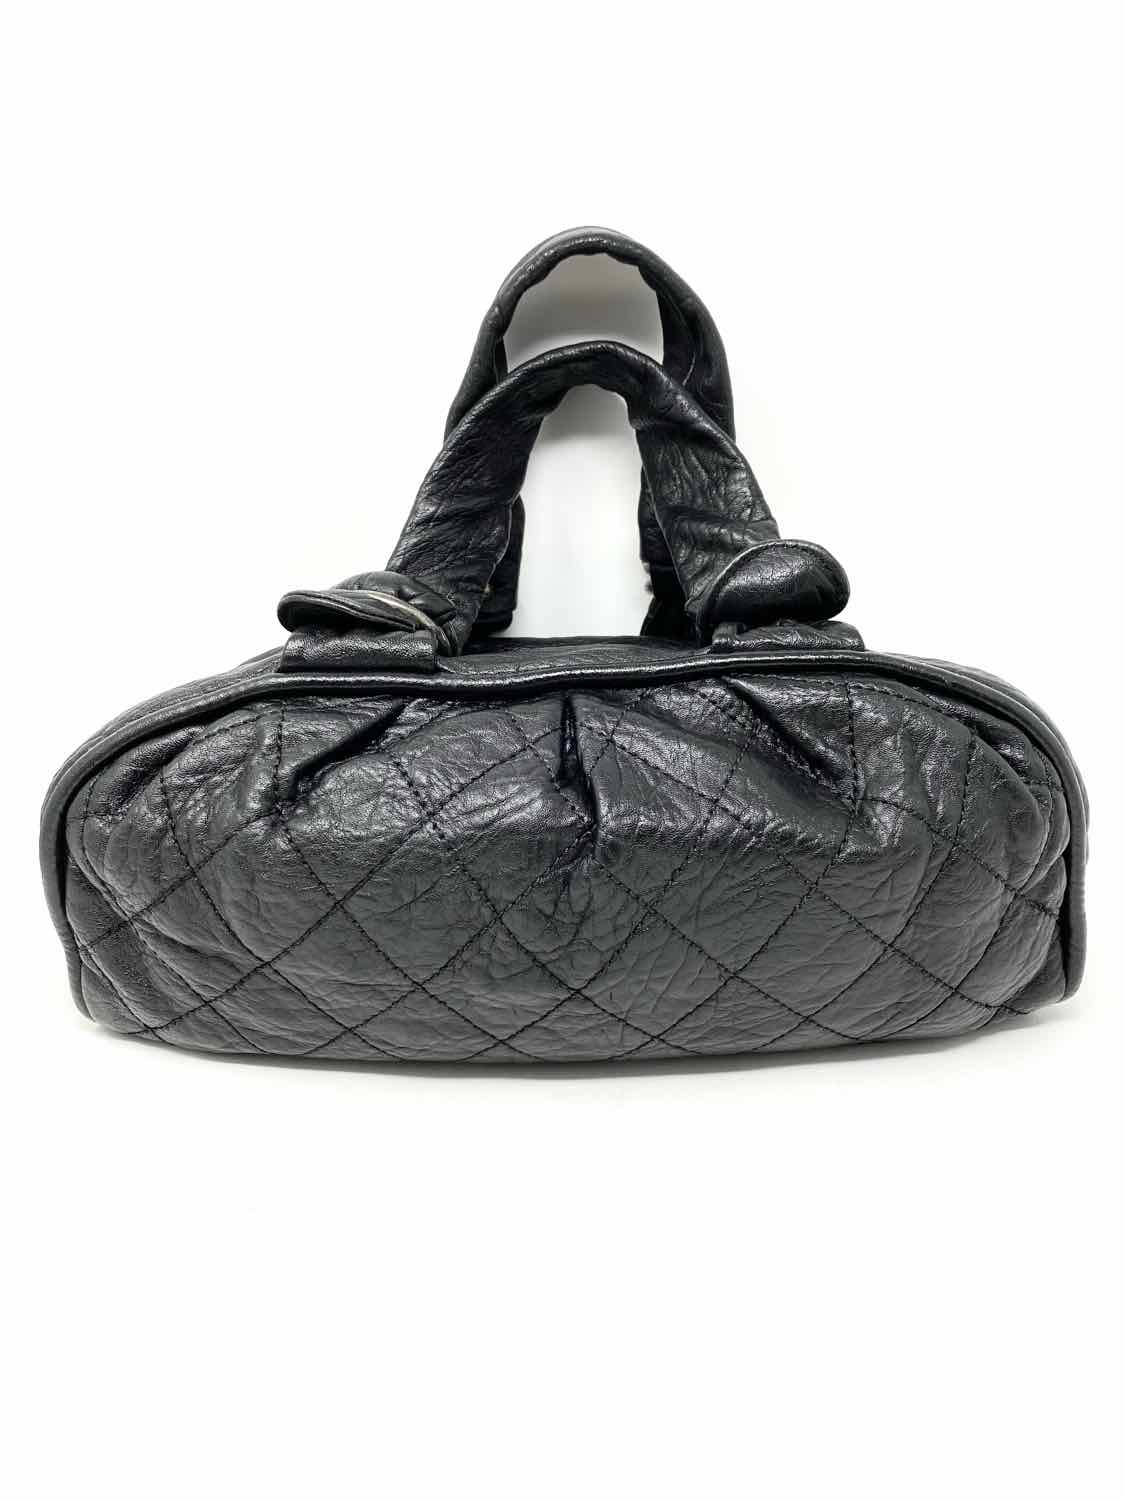 Chanel 2006/08 Soft Quilted Bowling Bag CC Zip Black Satchel - Article  Consignment